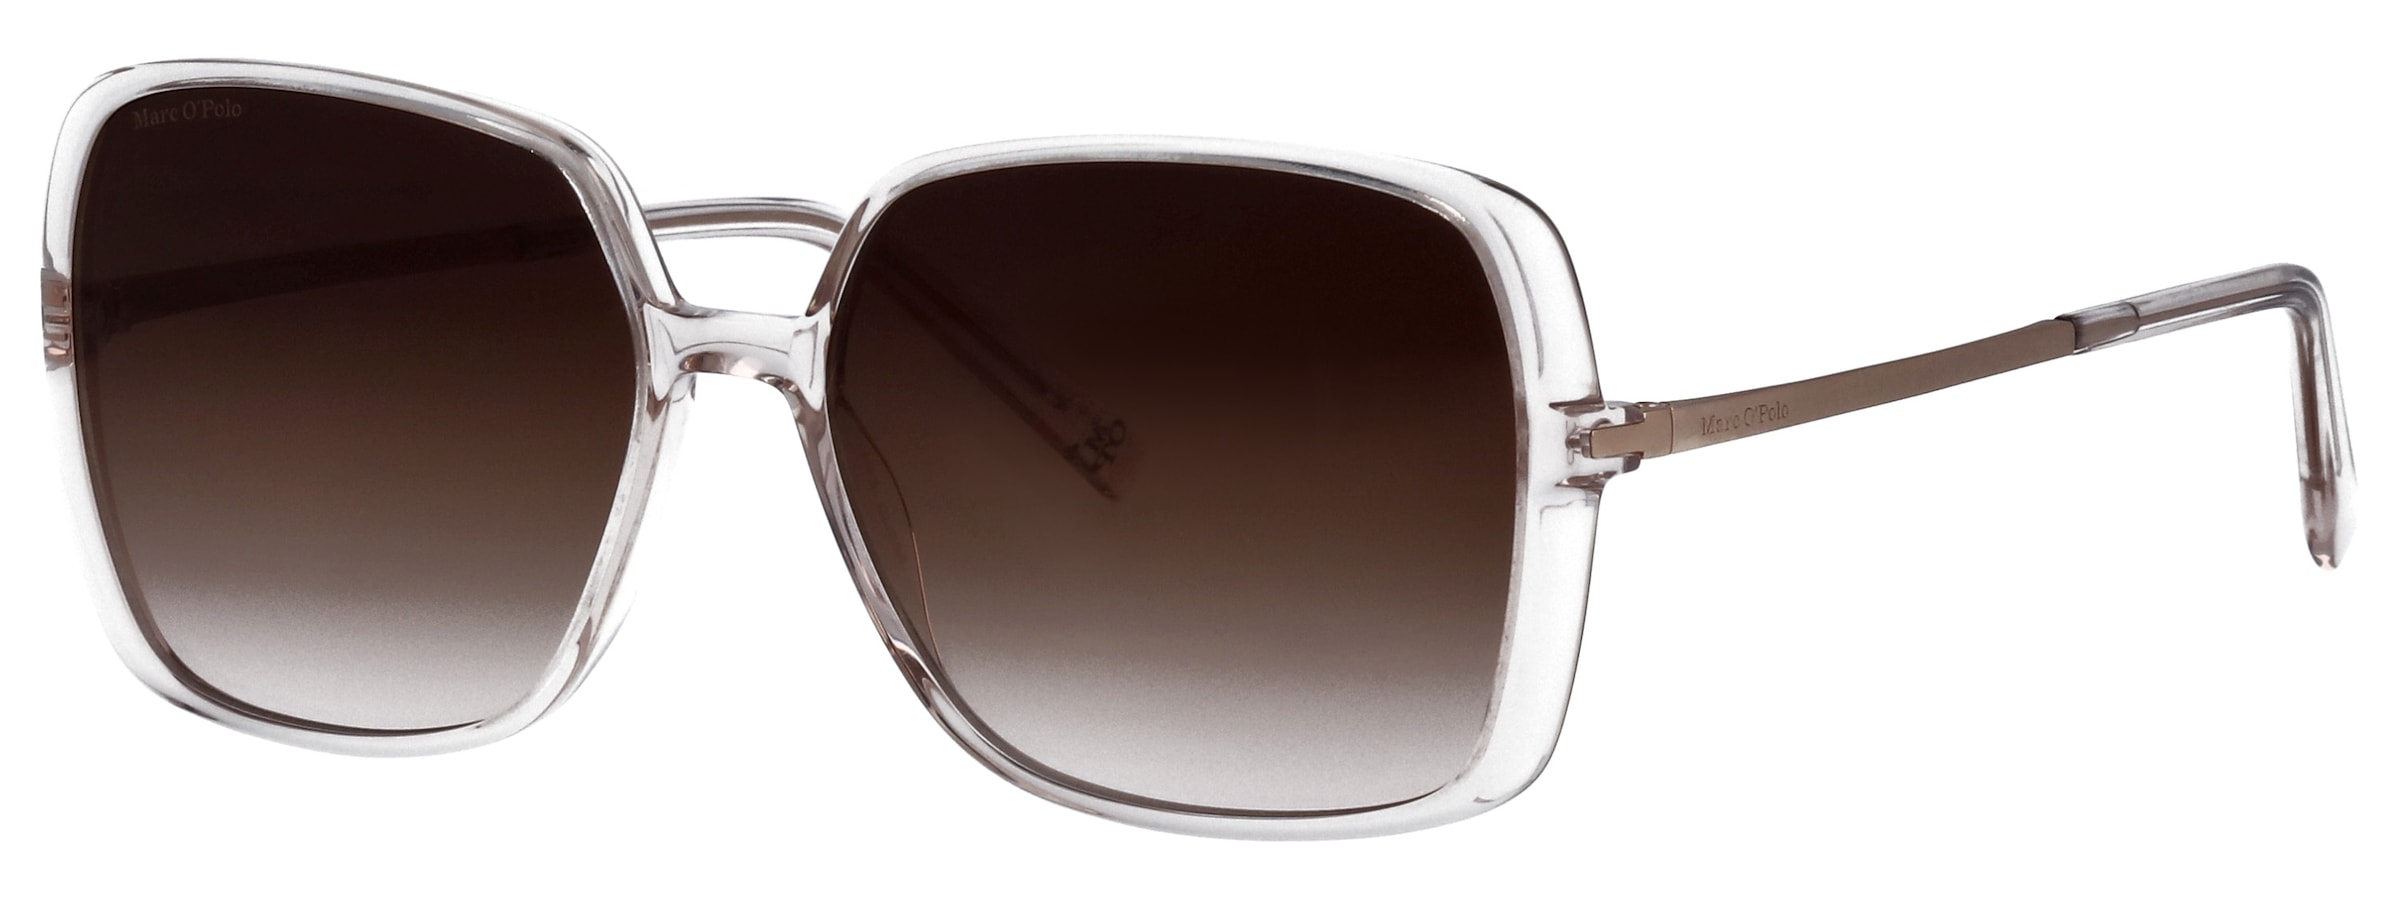 Marc OPolo Sonnenbrille "Modell 506190", Karree-From